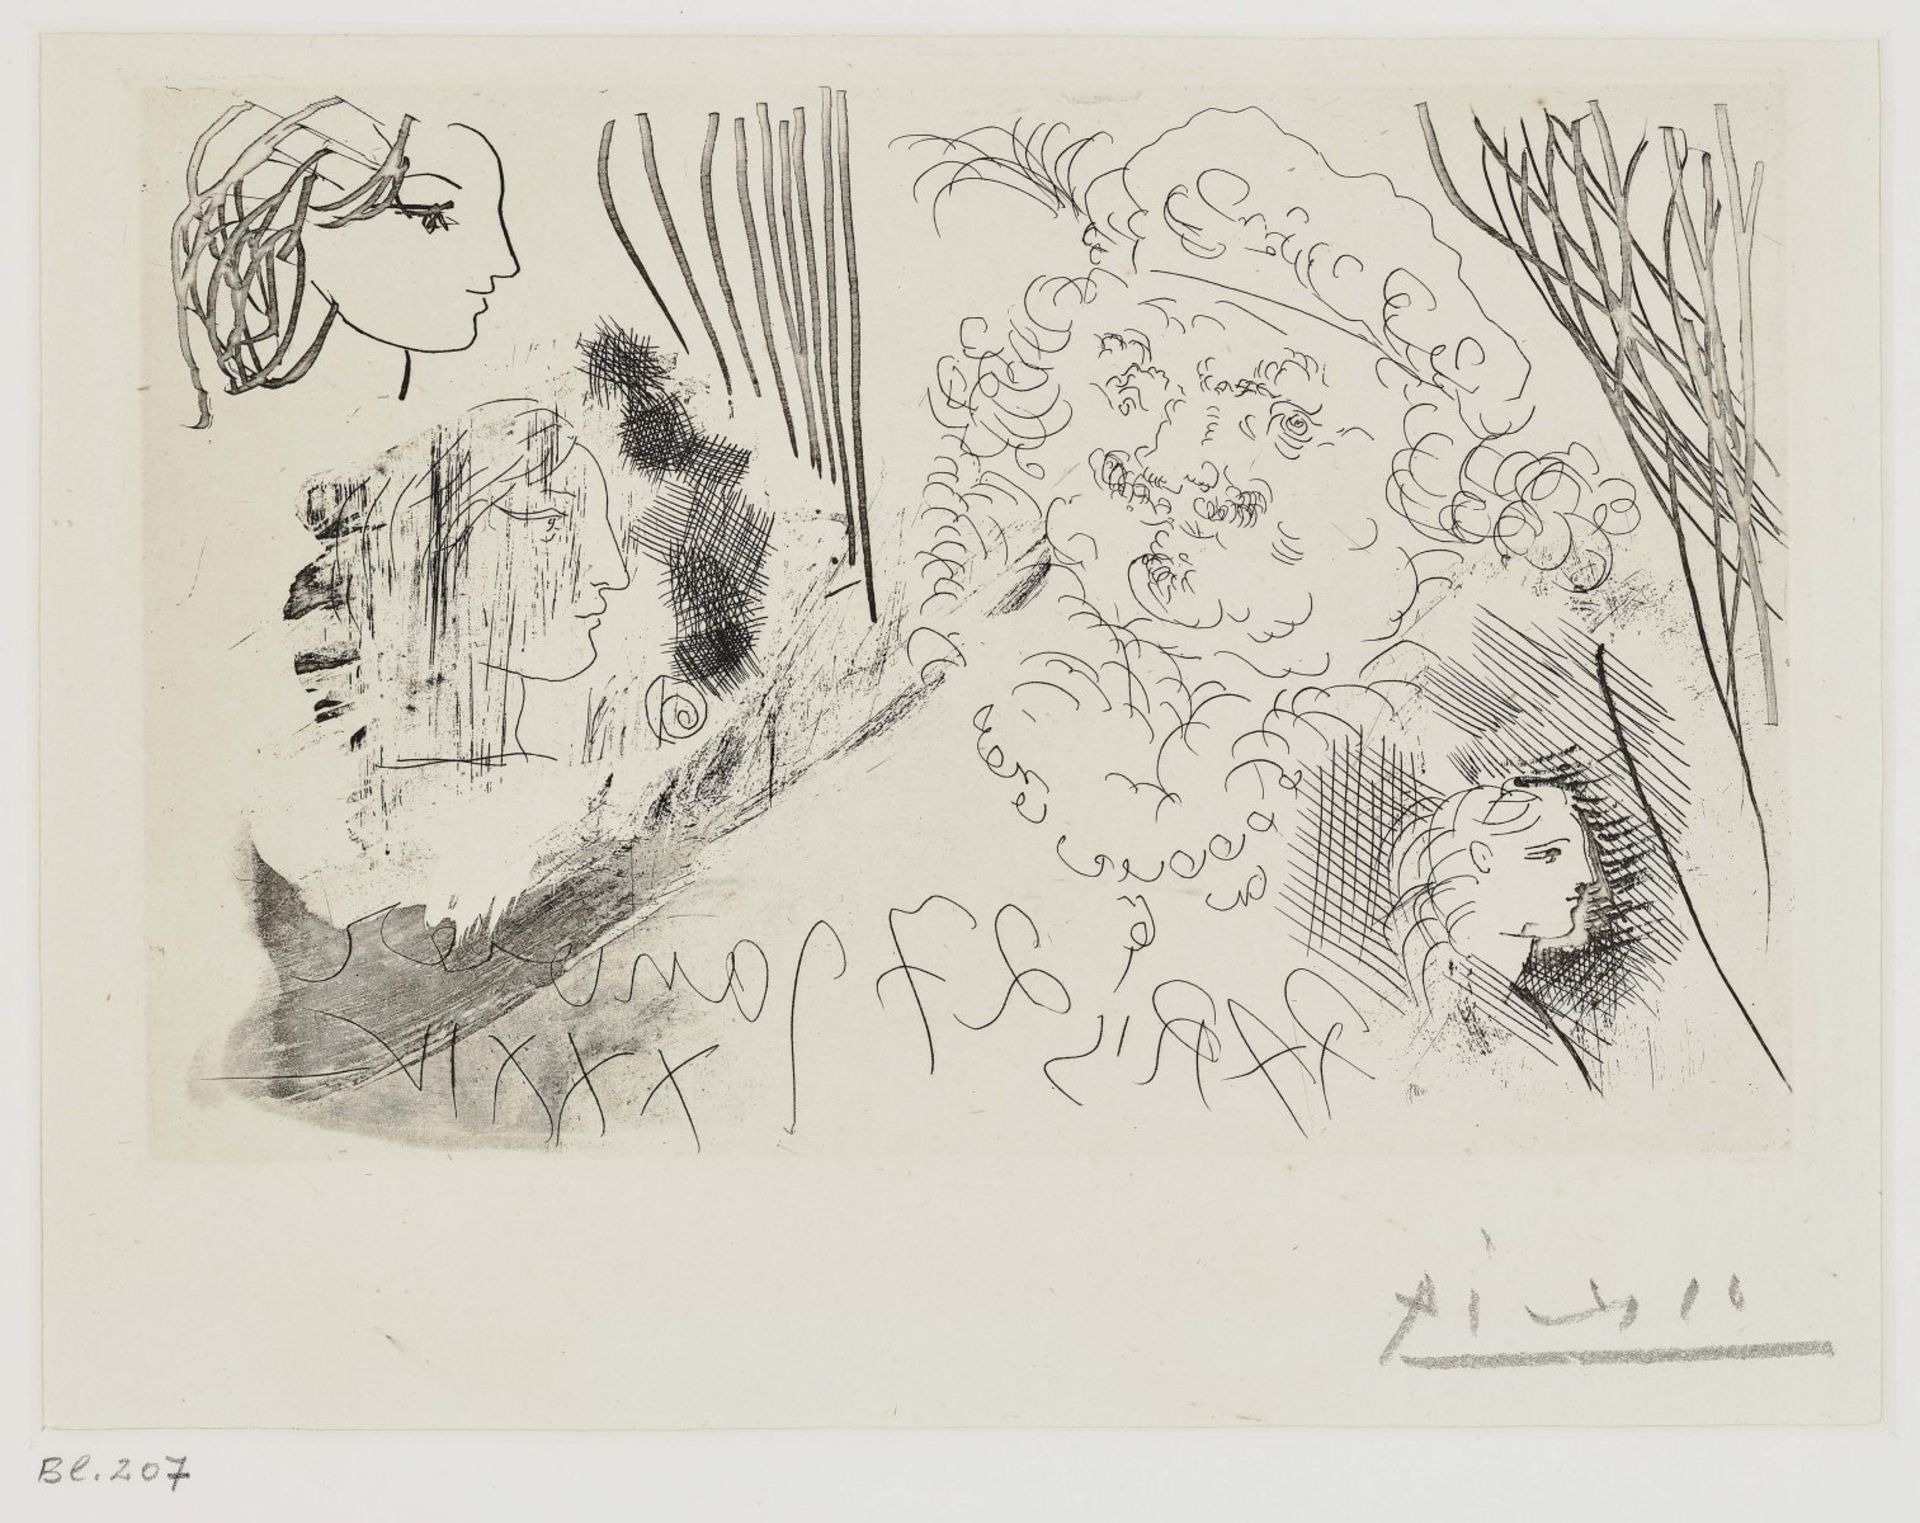 Picasso, PabloRembrandt et Tetes de Femme. 1934 Etching on handmade paper from Montval (watermark: